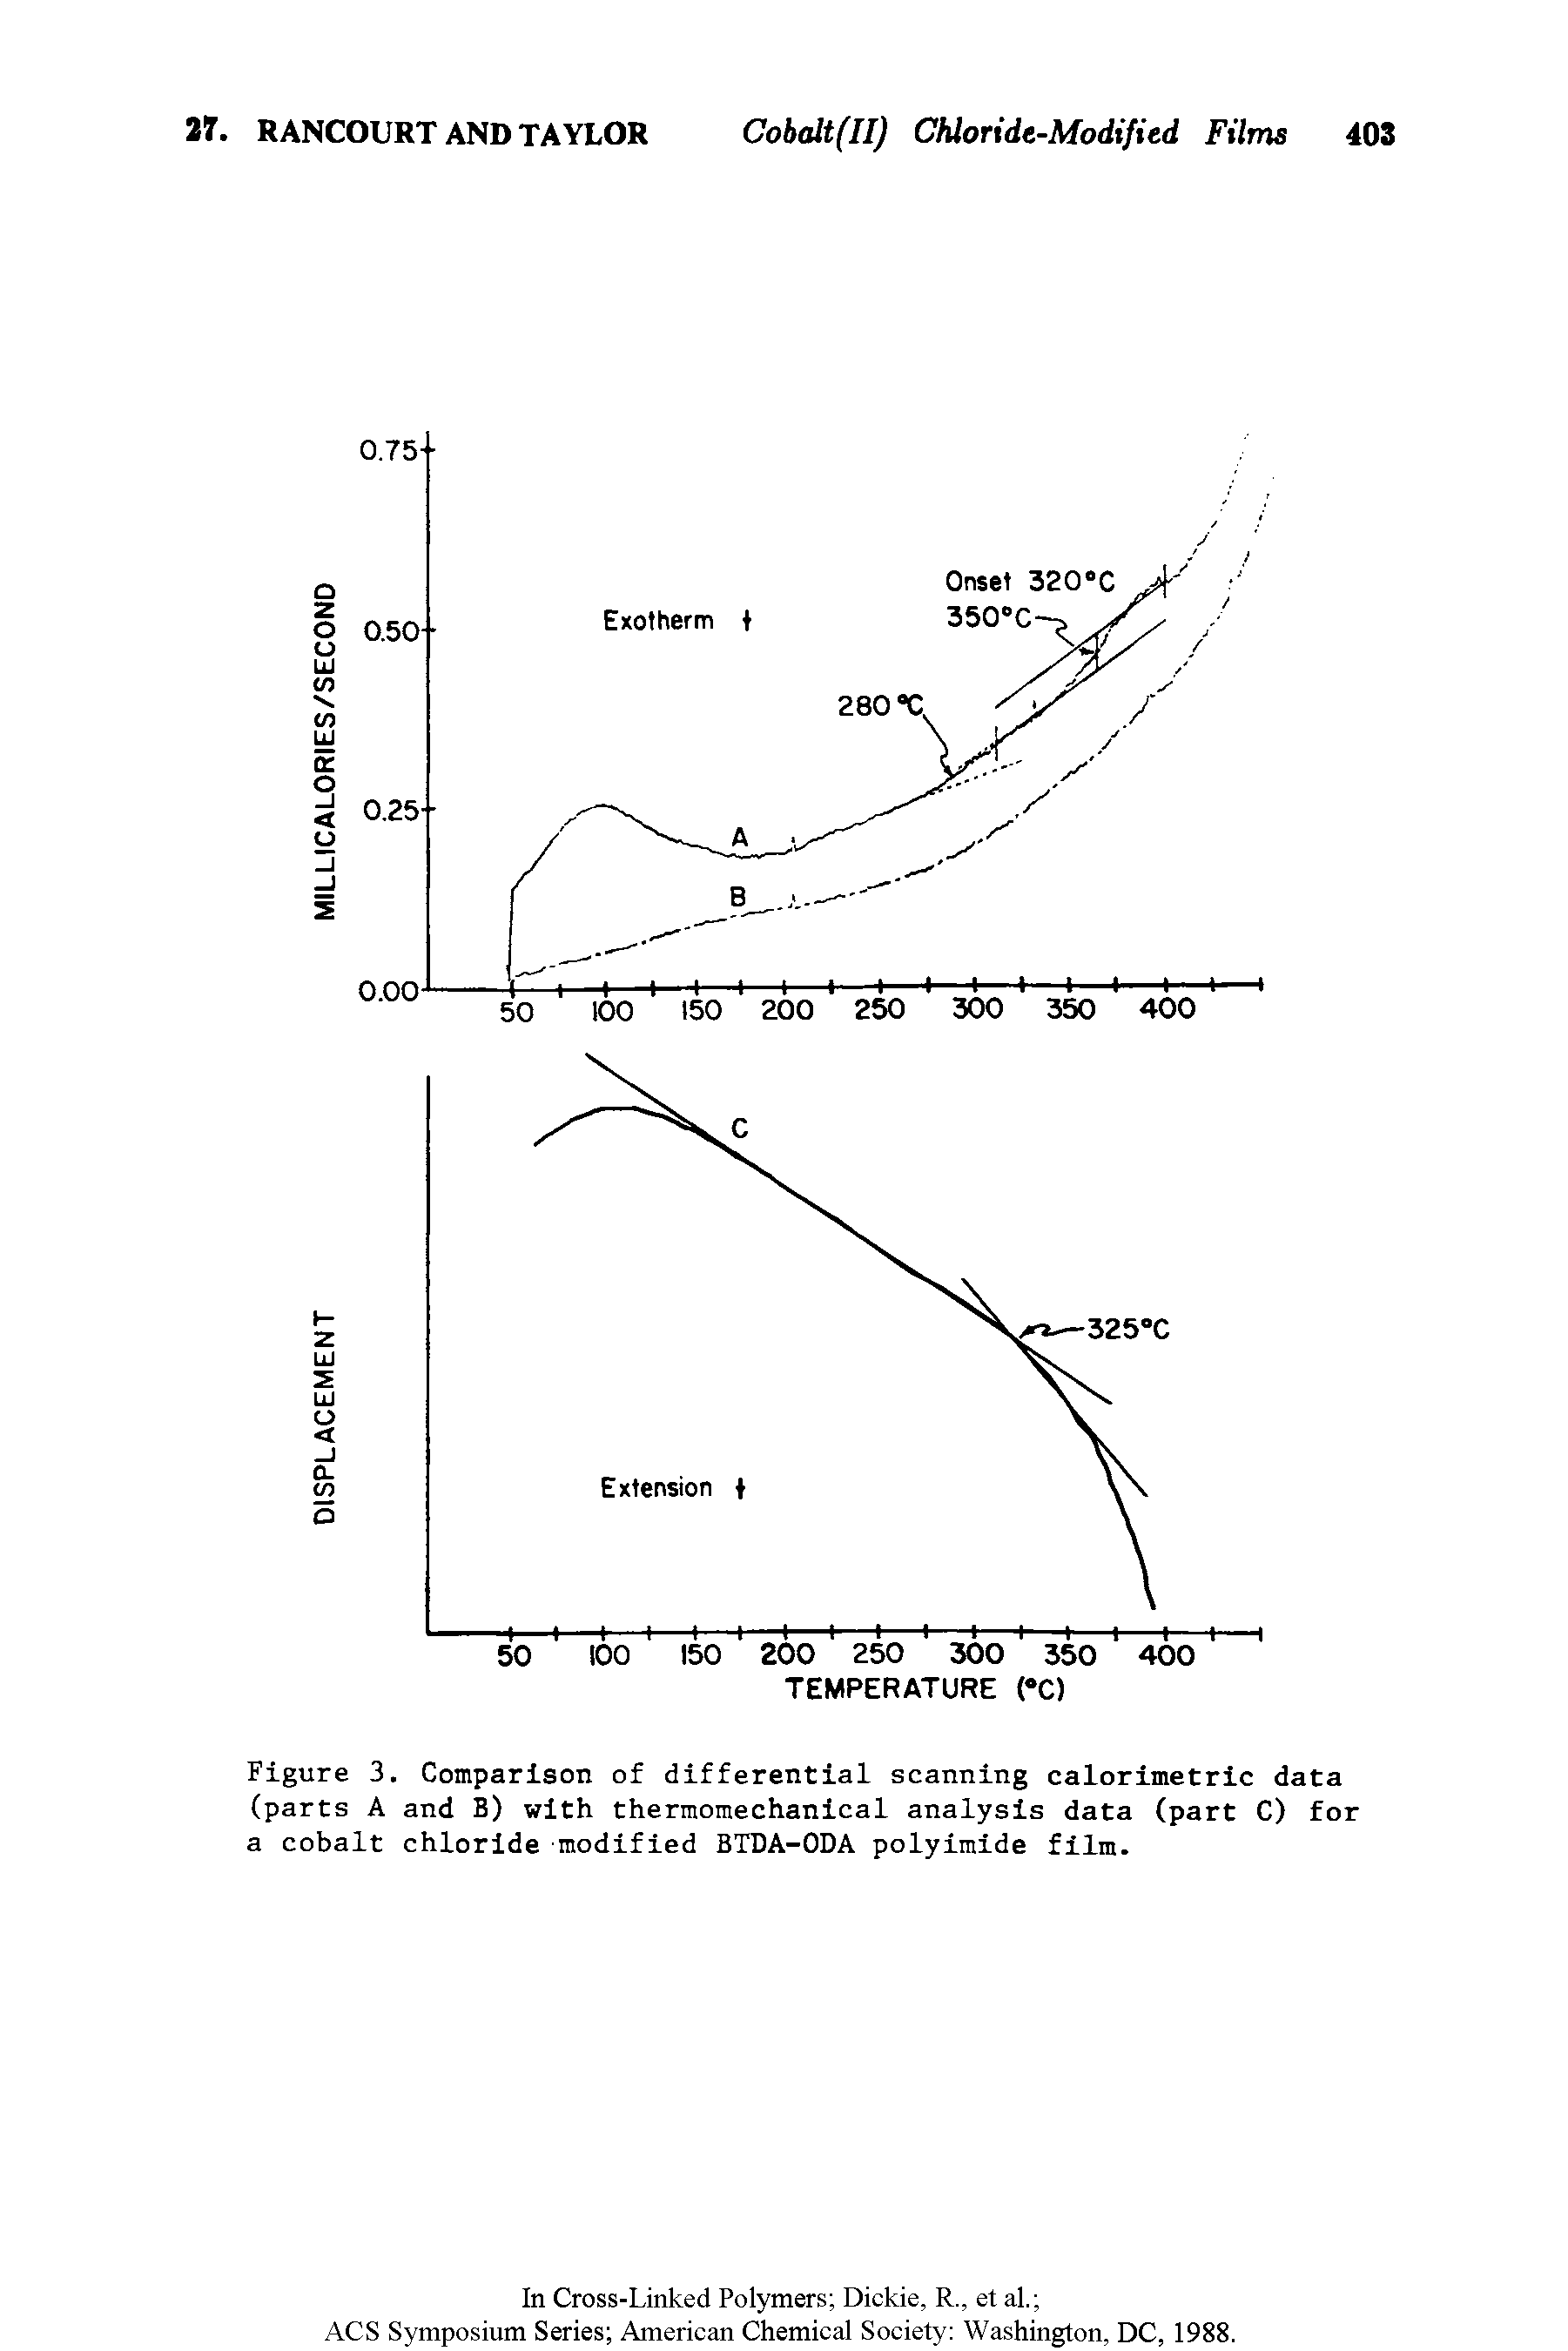 Figure 3. Comparison of differential scanning calorimetric data (parts A and B) with thermomechanical analysis data (part C) for a cobalt chloride modified BTDA-ODA polyimide film.